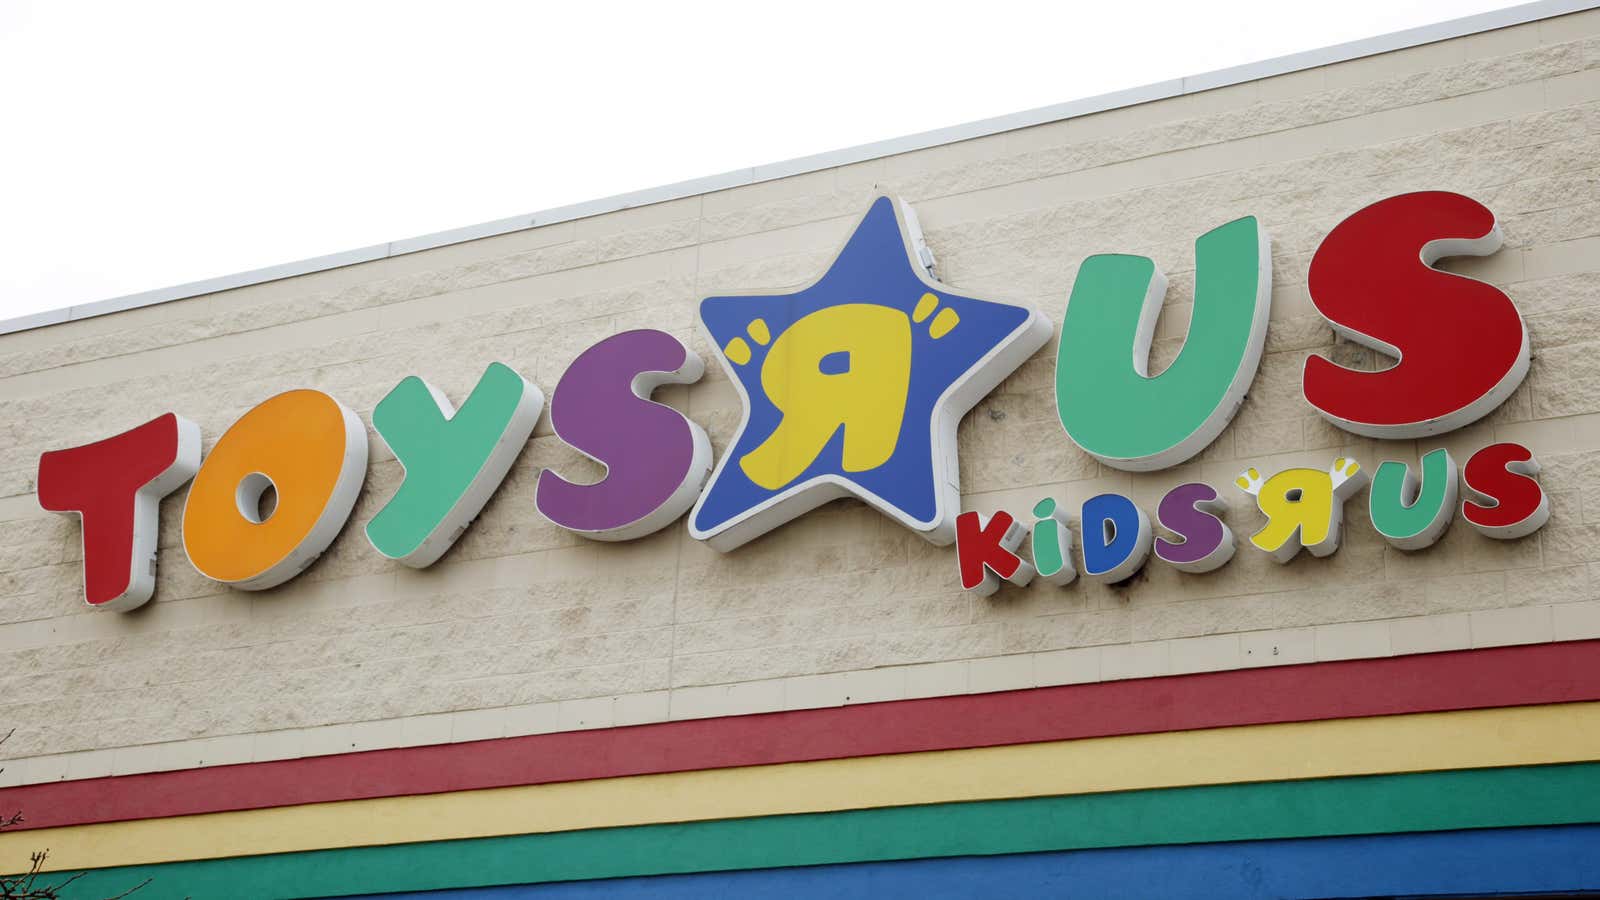 Toys R Us bankruptcy: A dot-com era deal with  marked the